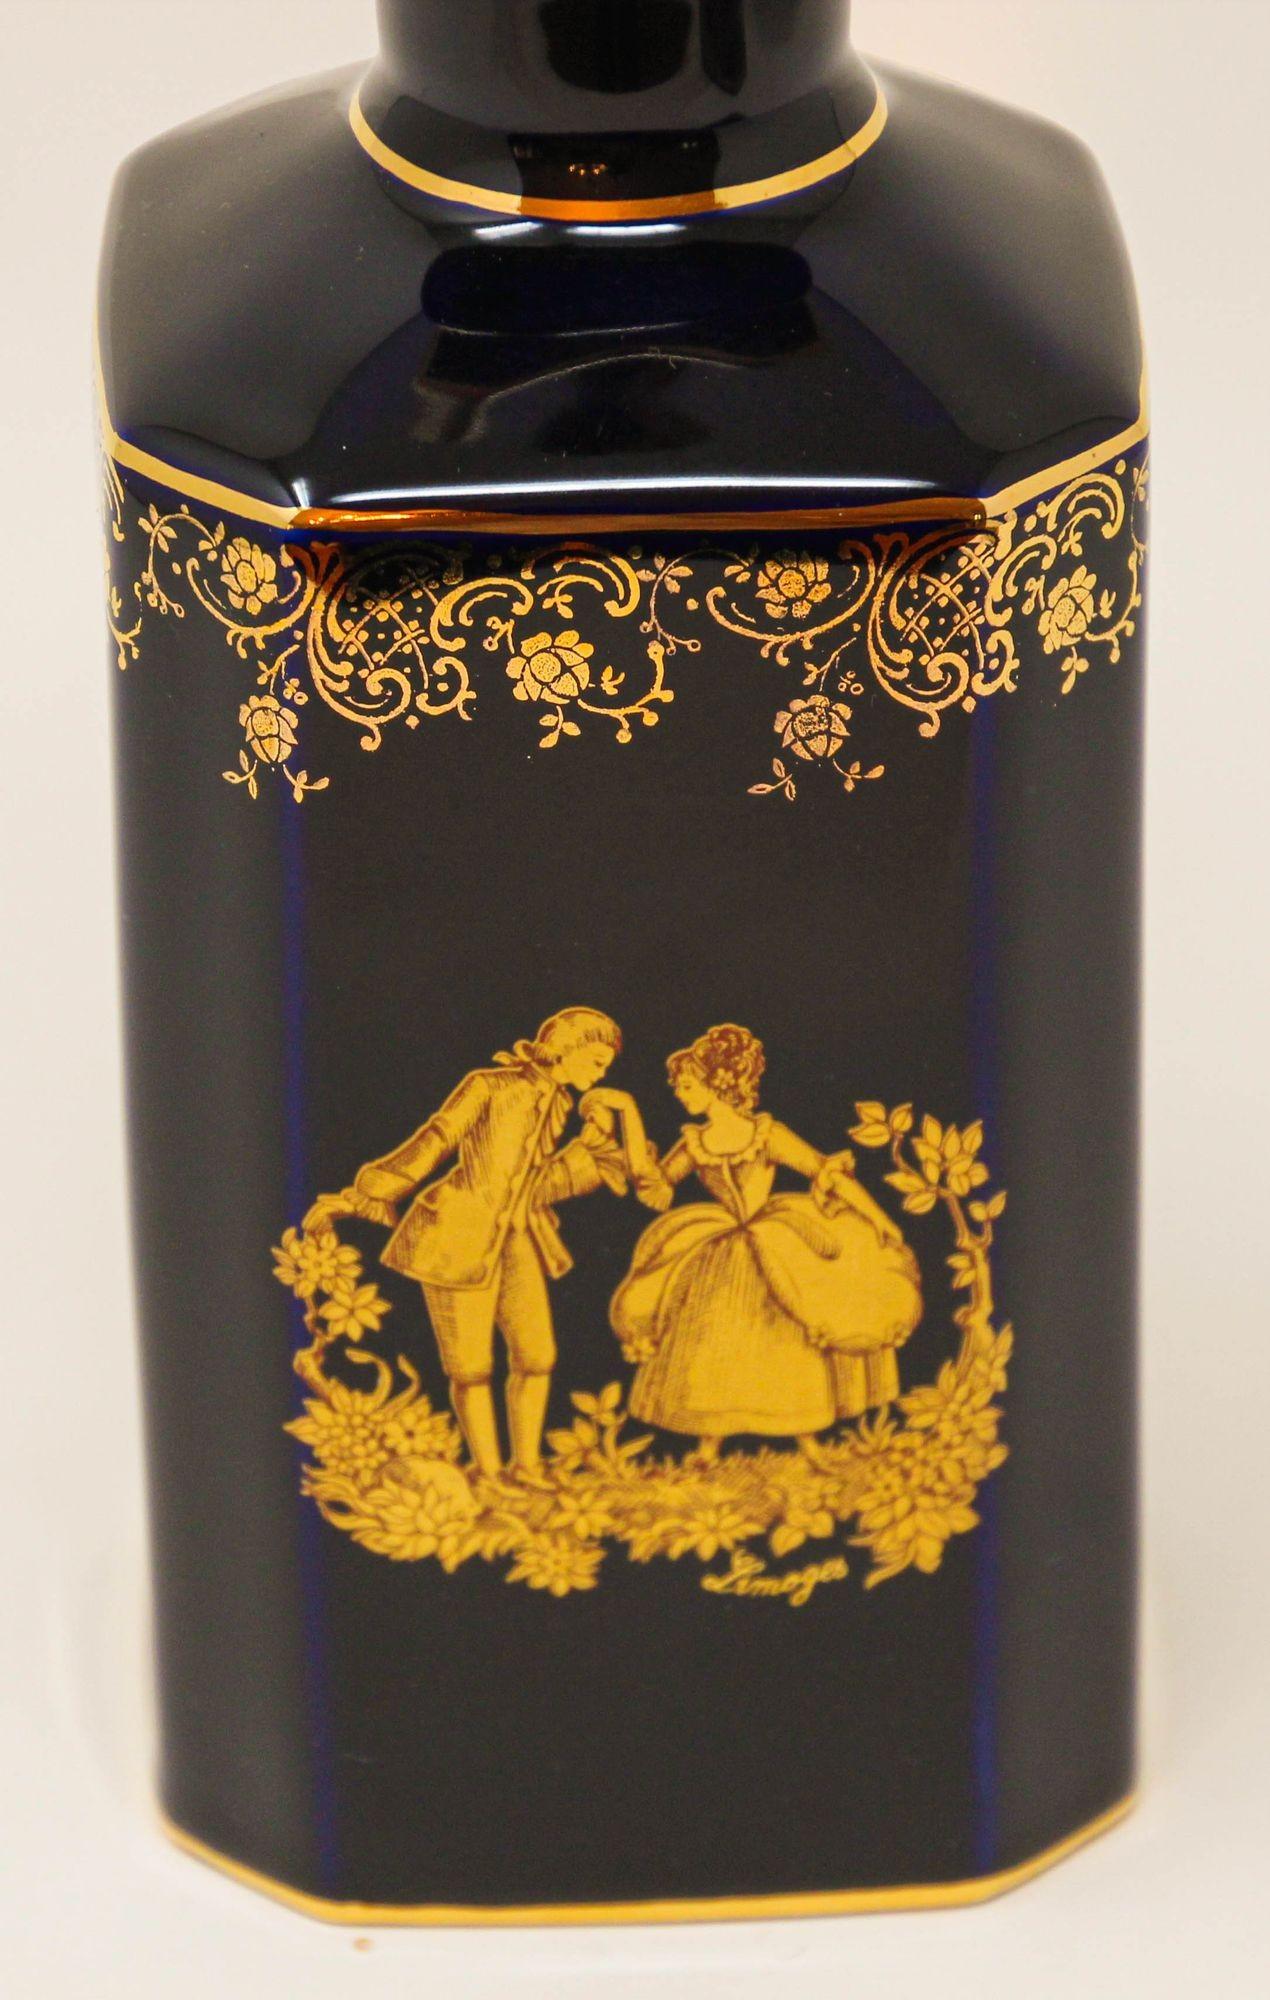 Vintage Limoges gilded French cobalt blue porcelain decanter featuring a beautiful scene of lovers courting done in 22kt gold.
There is hand painted gold floral around the top portion.
French vintage Limoges porcelain bottle in cobalt royal blue